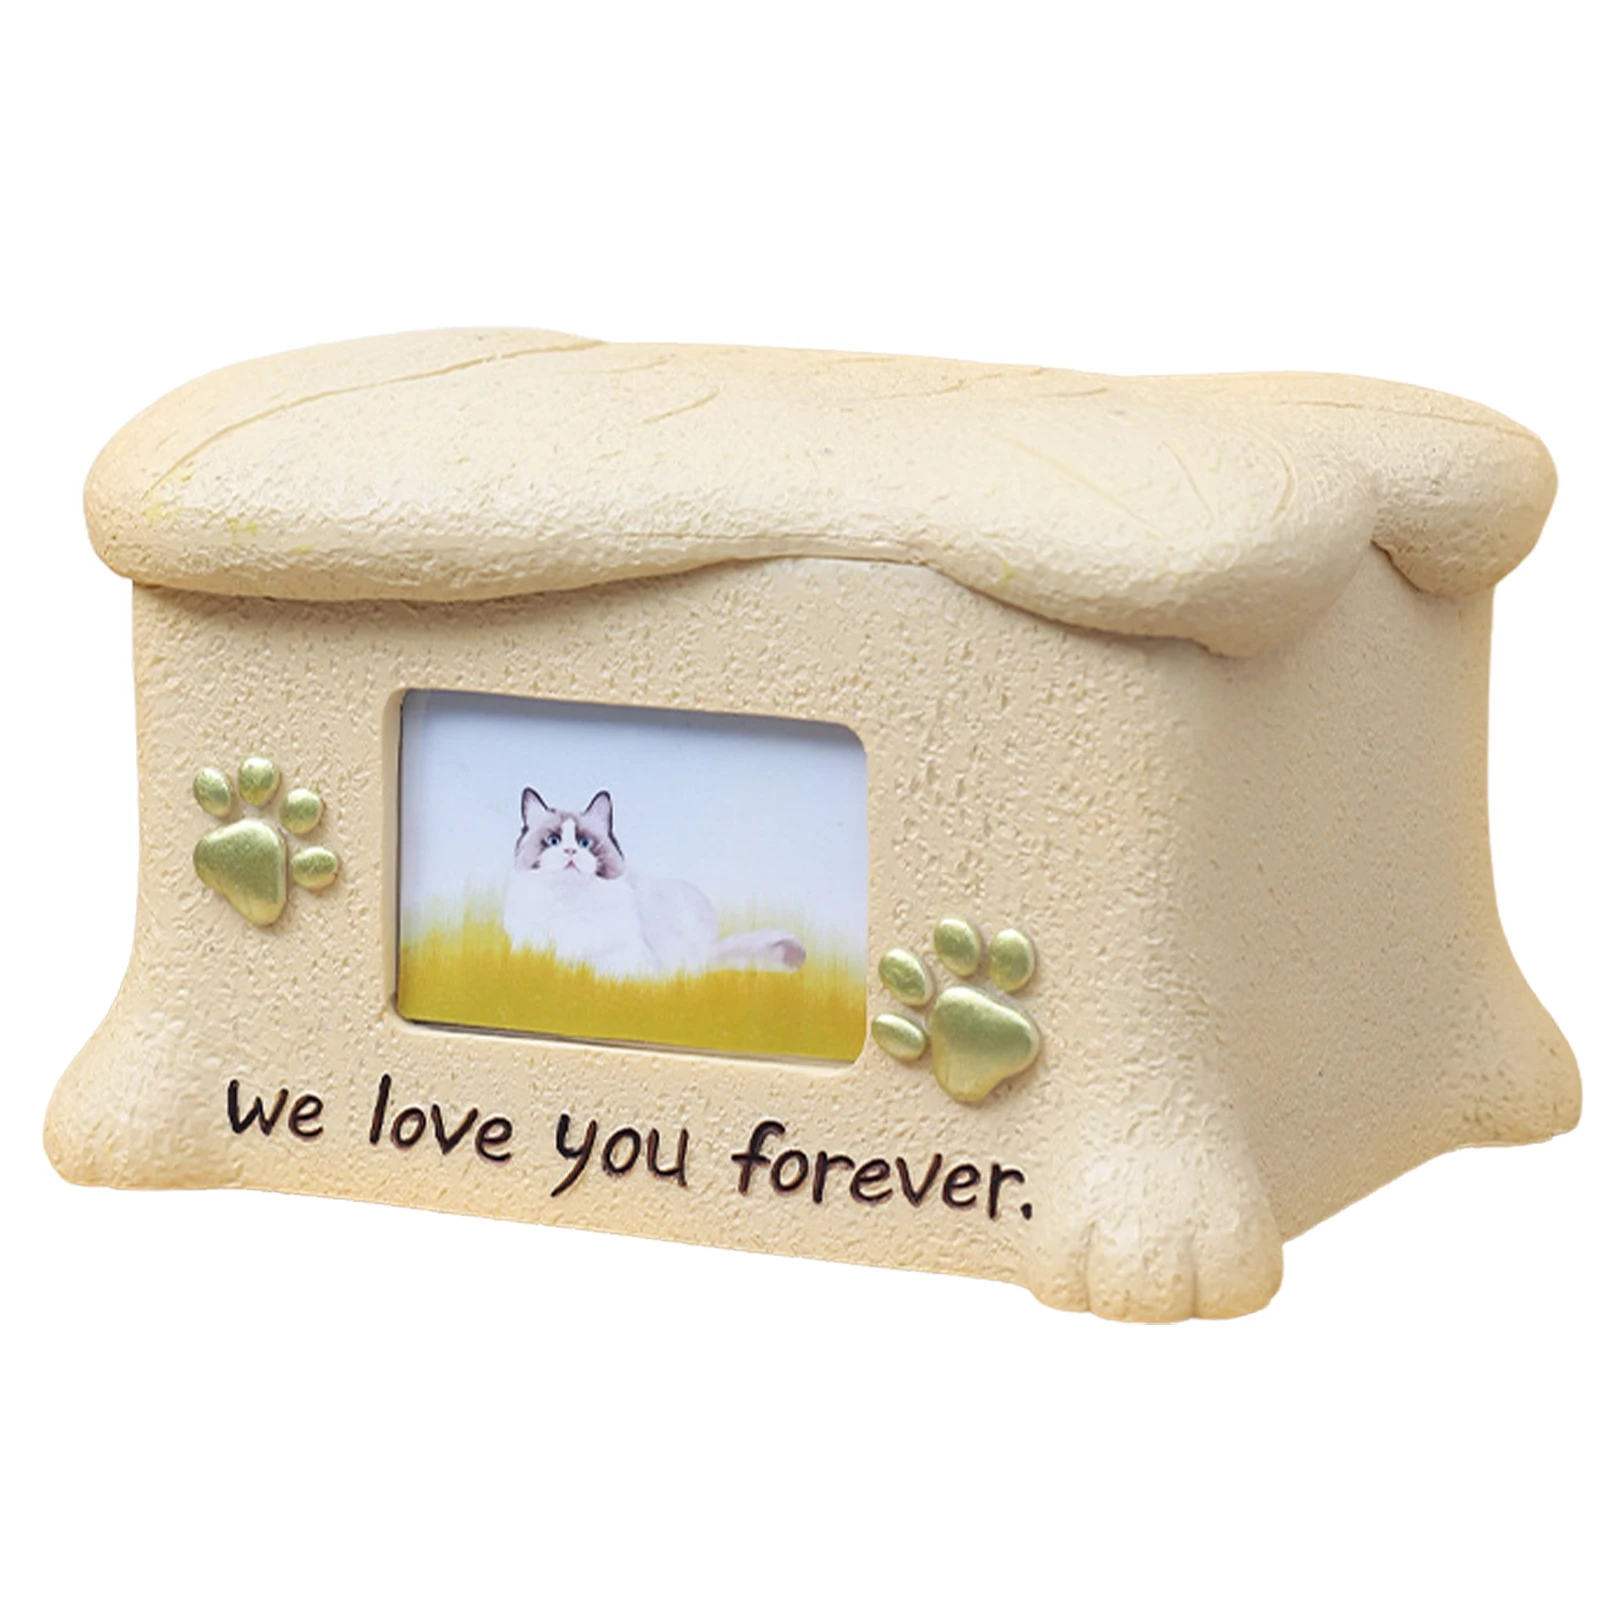 

Pet Urn For Dogs And Cats Resin Ashes Keepsake For Pets With Photo Frame Funeral Cremation Urns Keepsake Memorial For Dogs/Cats